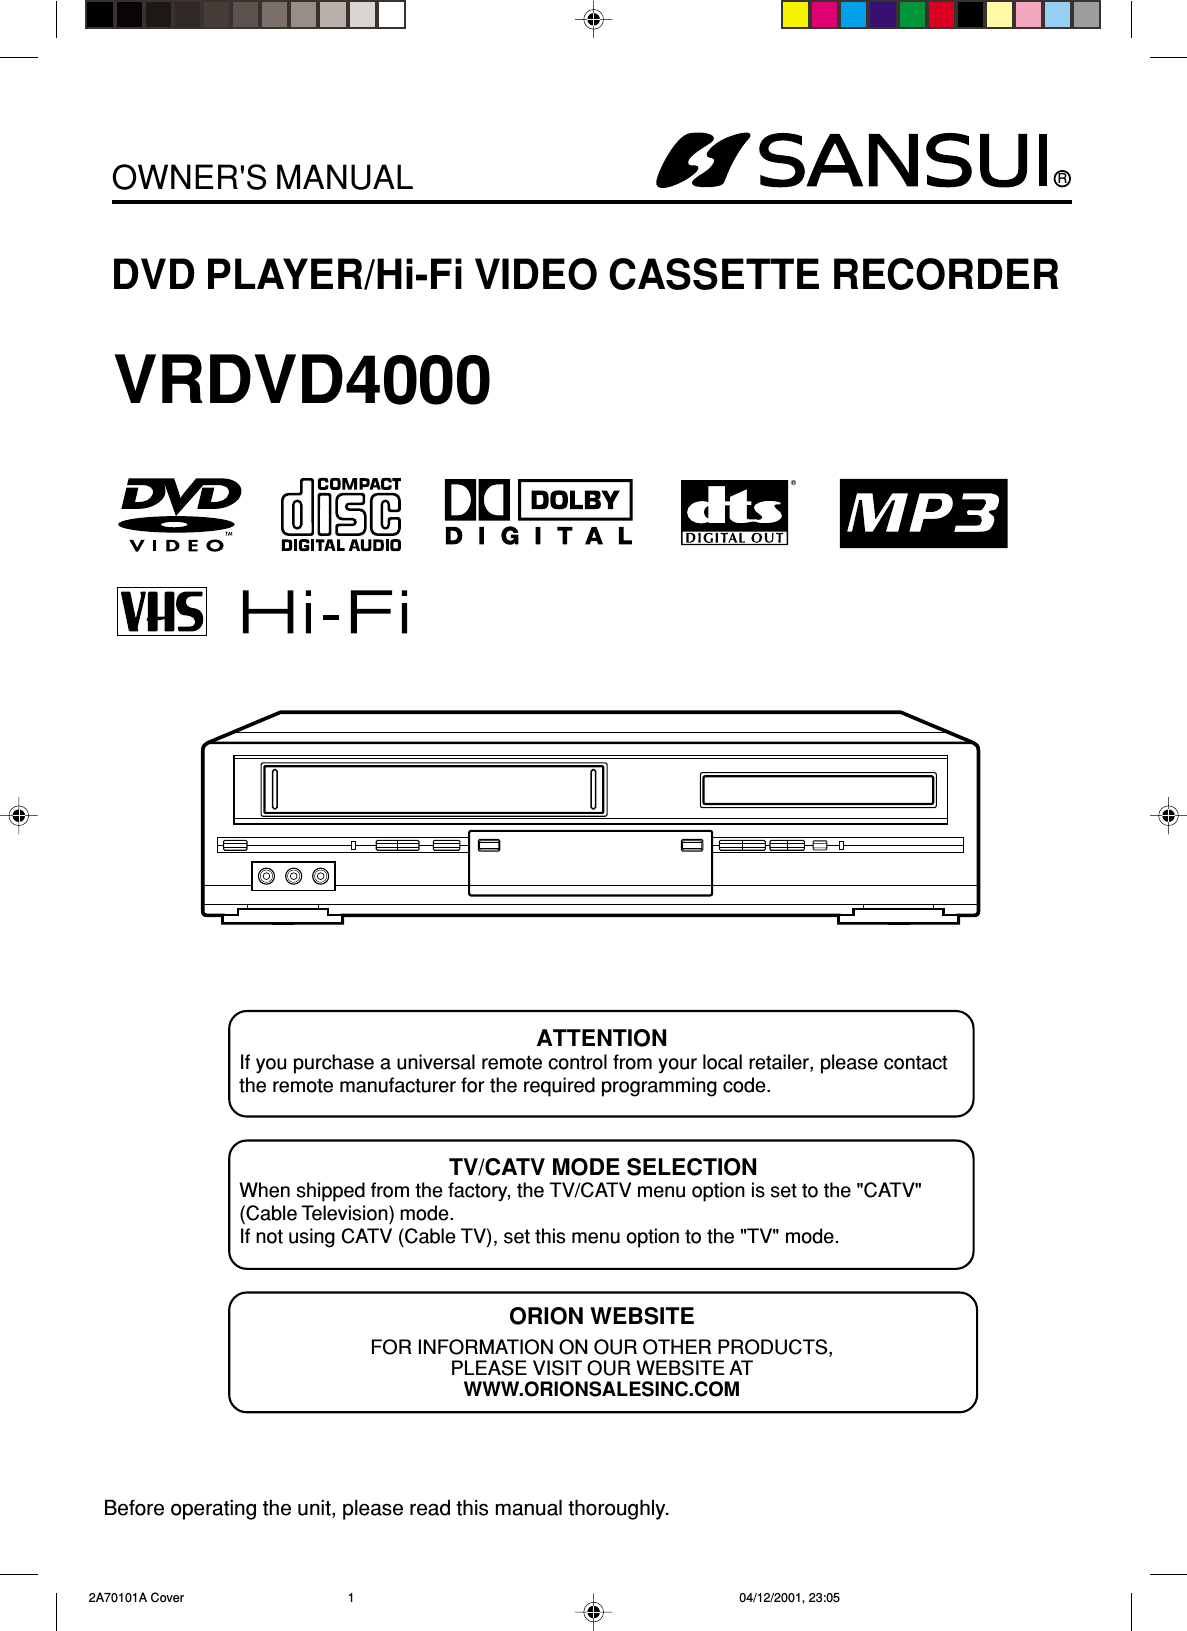 RDVD PLAYER/Hi-Fi VIDEO CASSETTE RECORDEROWNER&apos;S MANUALBefore operating the unit, please read this manual thoroughly.ATTENTIONIf you purchase a universal remote control from your local retailer, please contactthe remote manufacturer for the required programming code.TV/CATV MODE SELECTIONWhen shipped from the factory, the TV/CATV menu option is set to the &quot;CATV&quot;(Cable Television) mode.If not using CATV (Cable TV), set this menu option to the &quot;TV&quot; mode.ORION WEBSITEFOR INFORMATION ON OUR OTHER PRODUCTS,PLEASE VISIT OUR WEBSITE ATWWW.ORIONSALESINC.COMVRDVD4000 2A70101A Cover 04/12/2001, 23:051